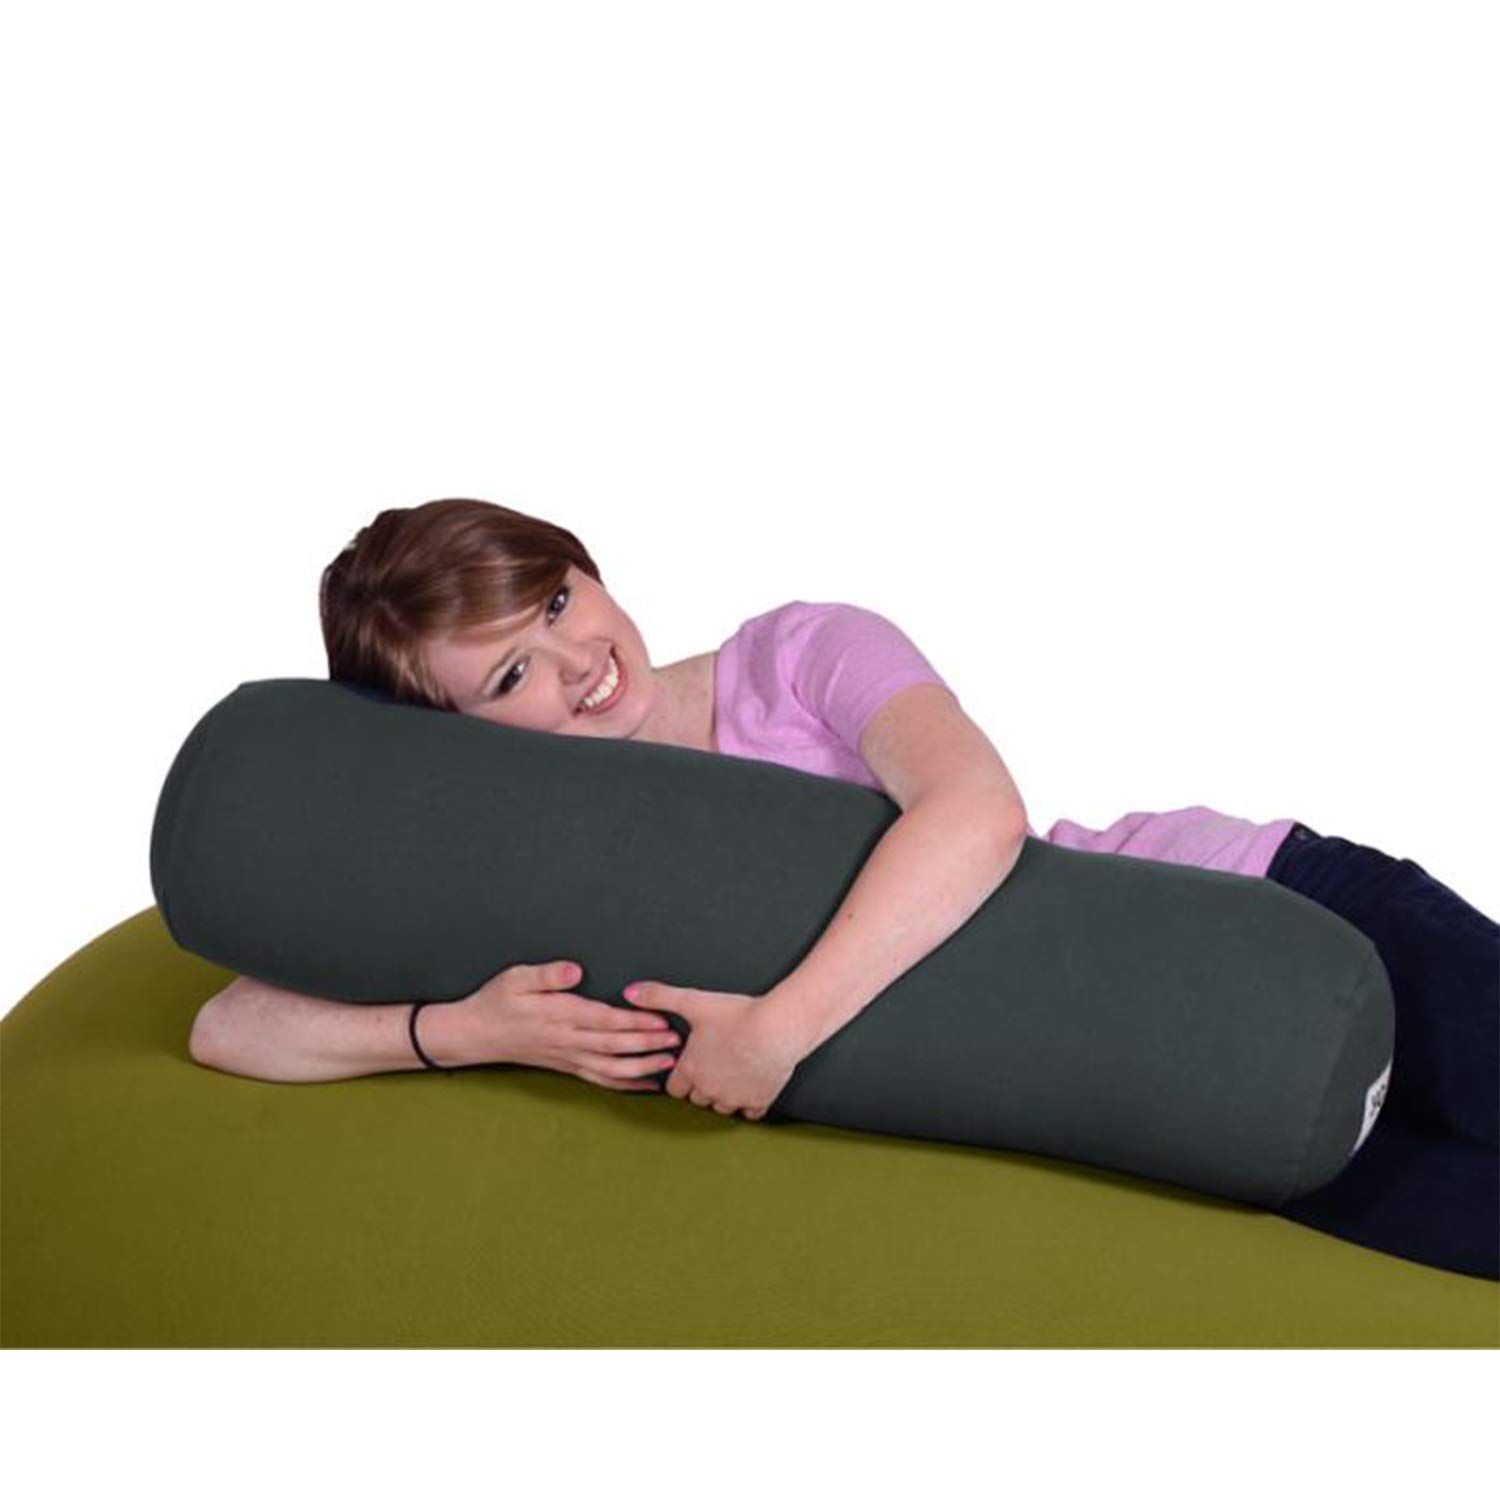 Yogibo Buddy Roll Body Pillow, Multipurpose Cushion Excellent for Back and Neck Support, Side Sleepers, Dark Gray